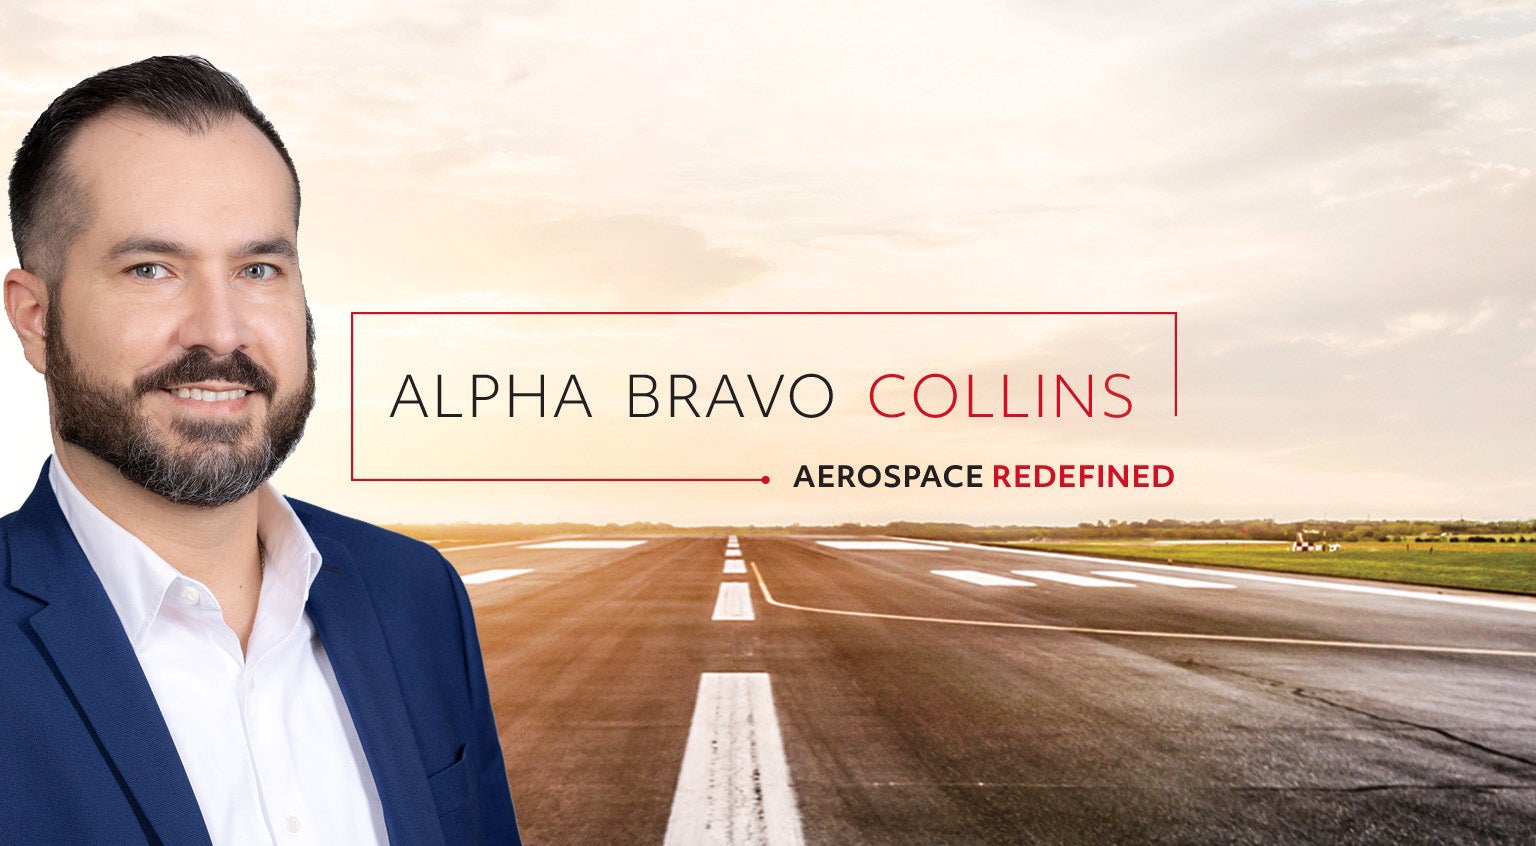 Headshot of Roberto Santiago to the left superimposed in front of an airport runway with the text Alpha Bravo Collins - Aerospace Redfined in the center